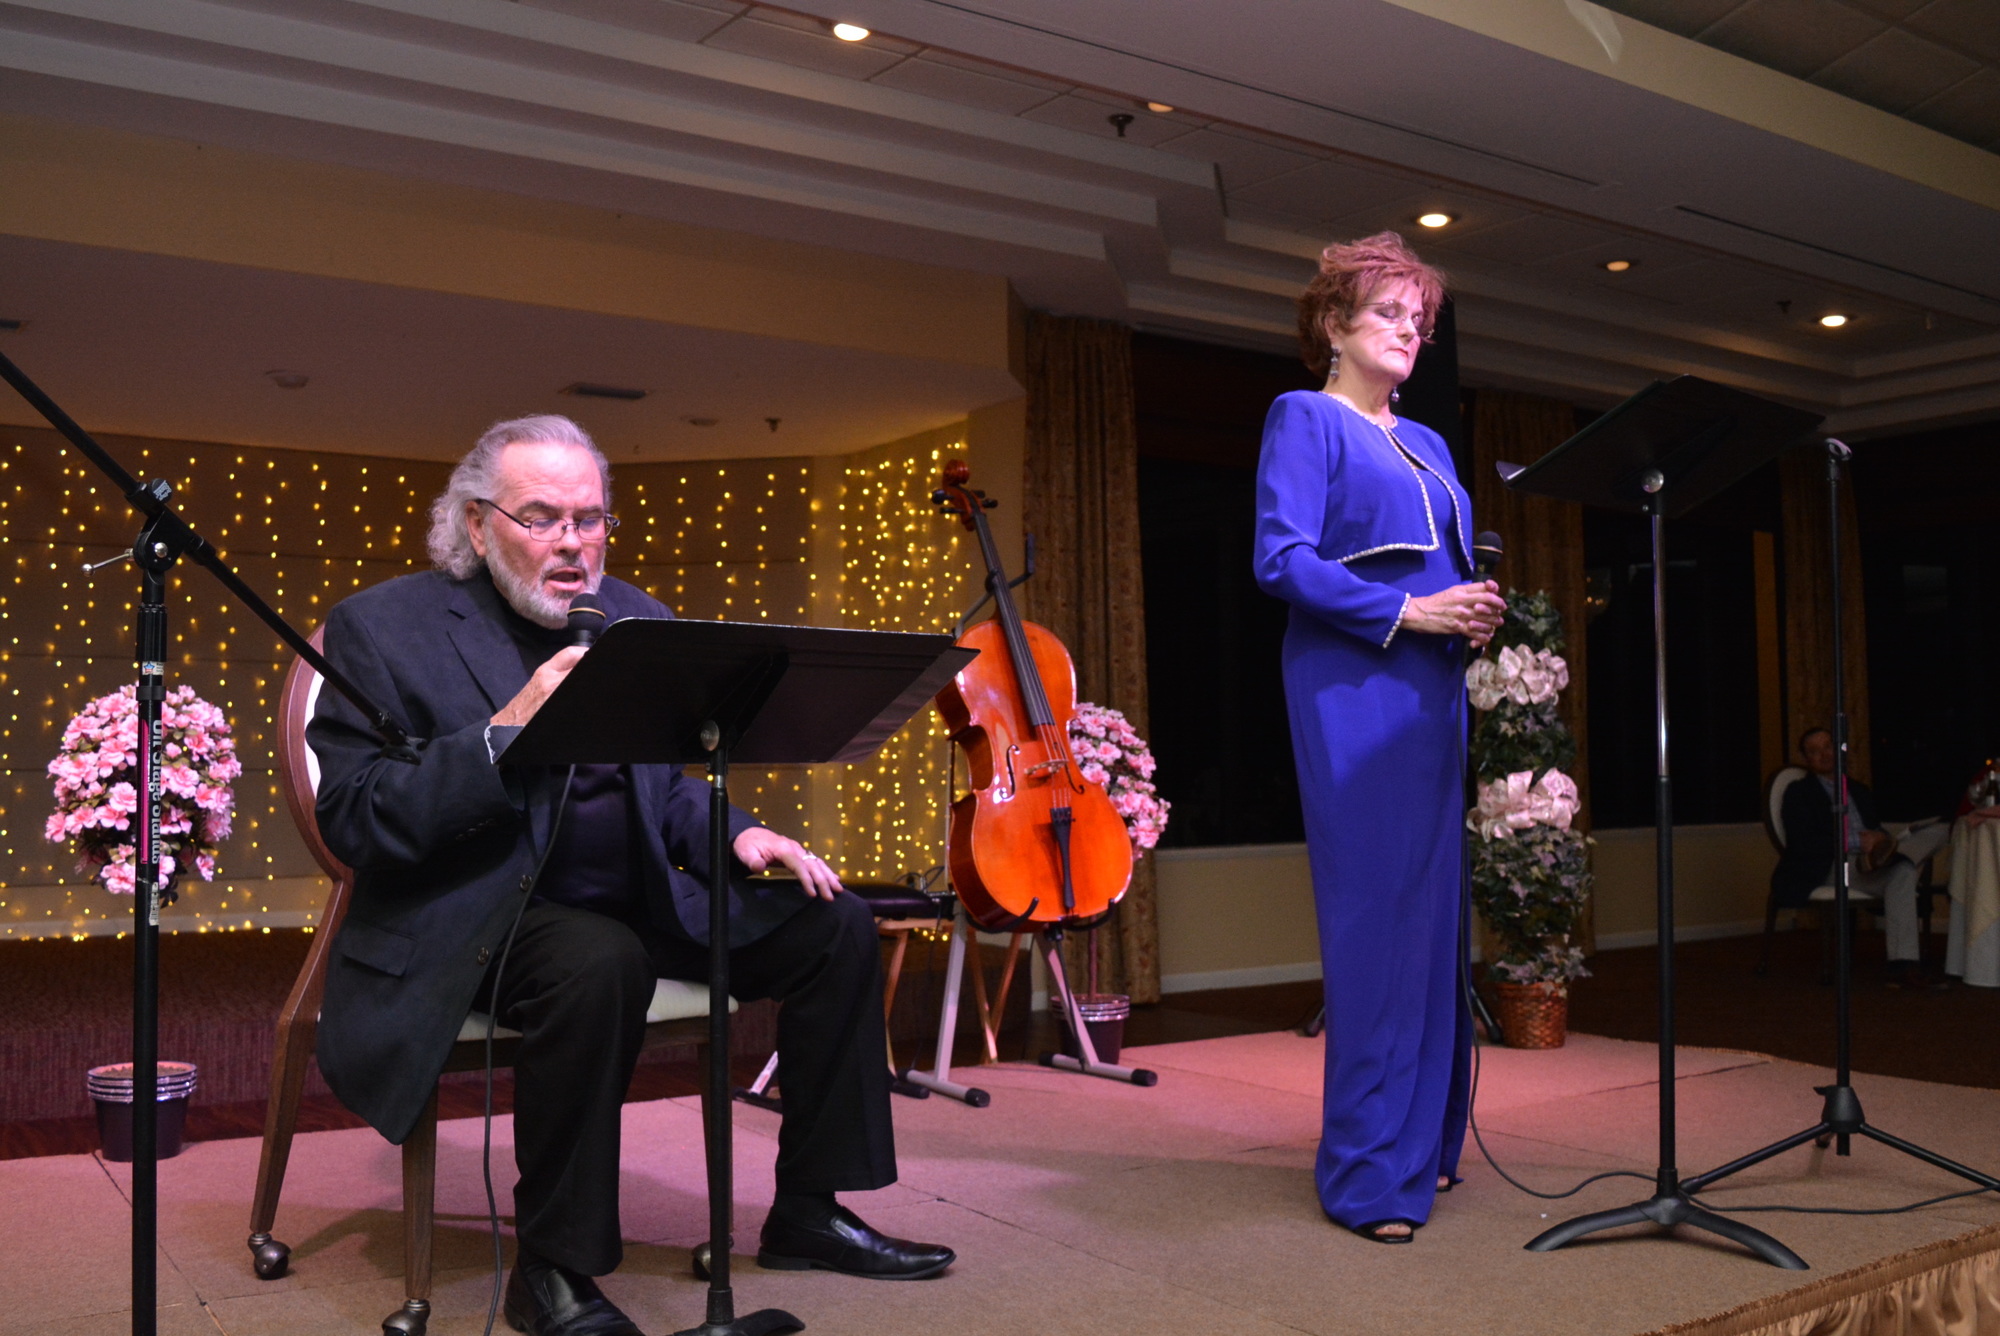 Randy Locke and Carol Sparrow perform at last year's OASIS benefit. They like make the event appealing to all — dressy but not formal, with a similar approach to the musical lineup. (Courtesy photo)